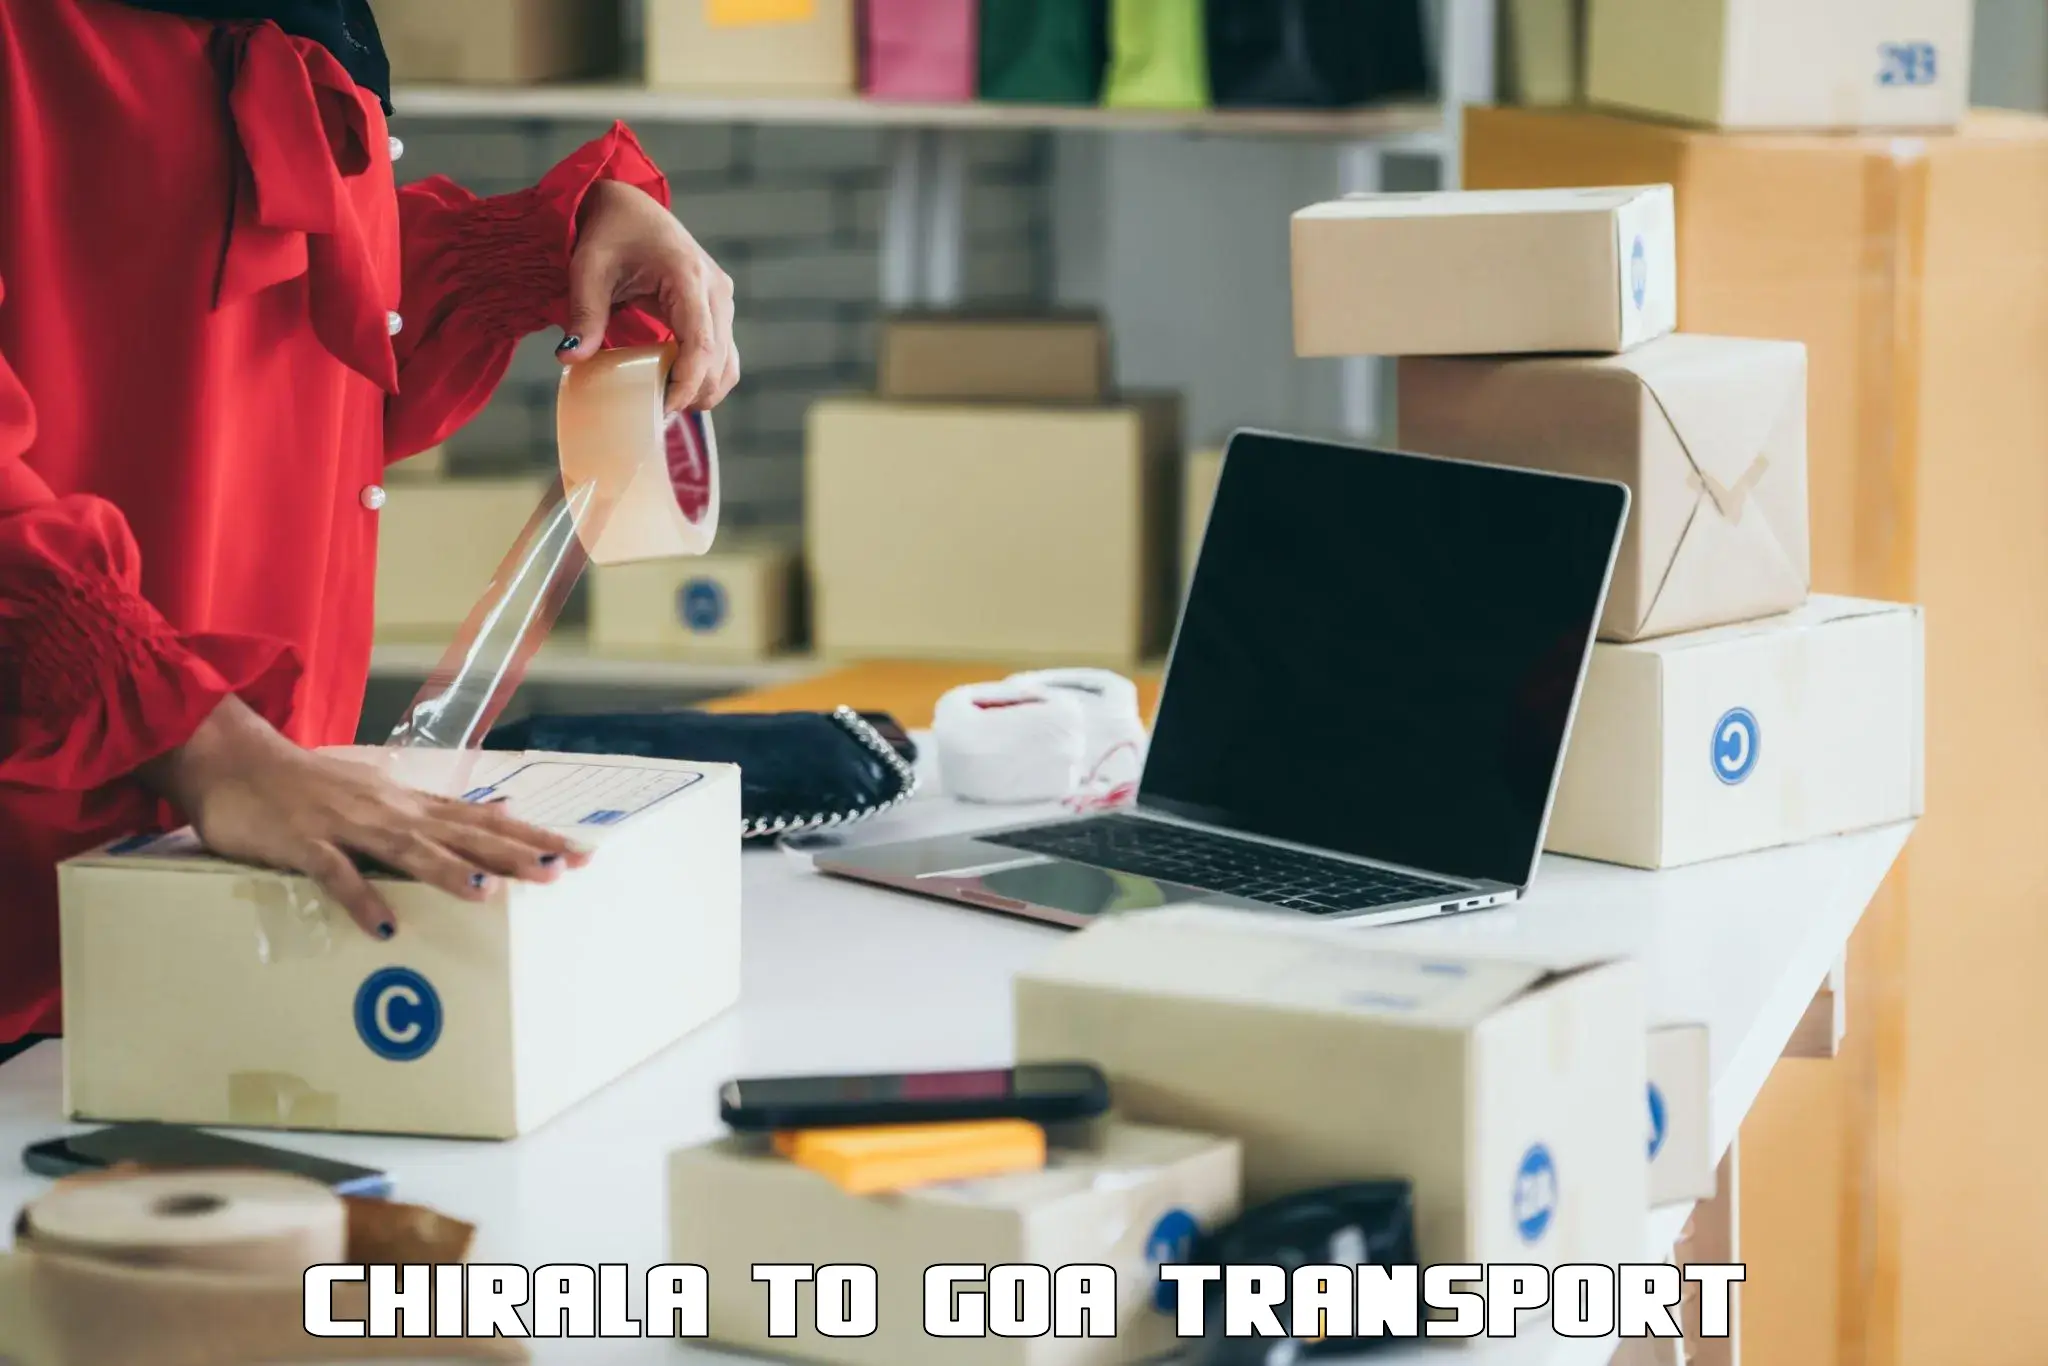 Container transport service Chirala to Goa